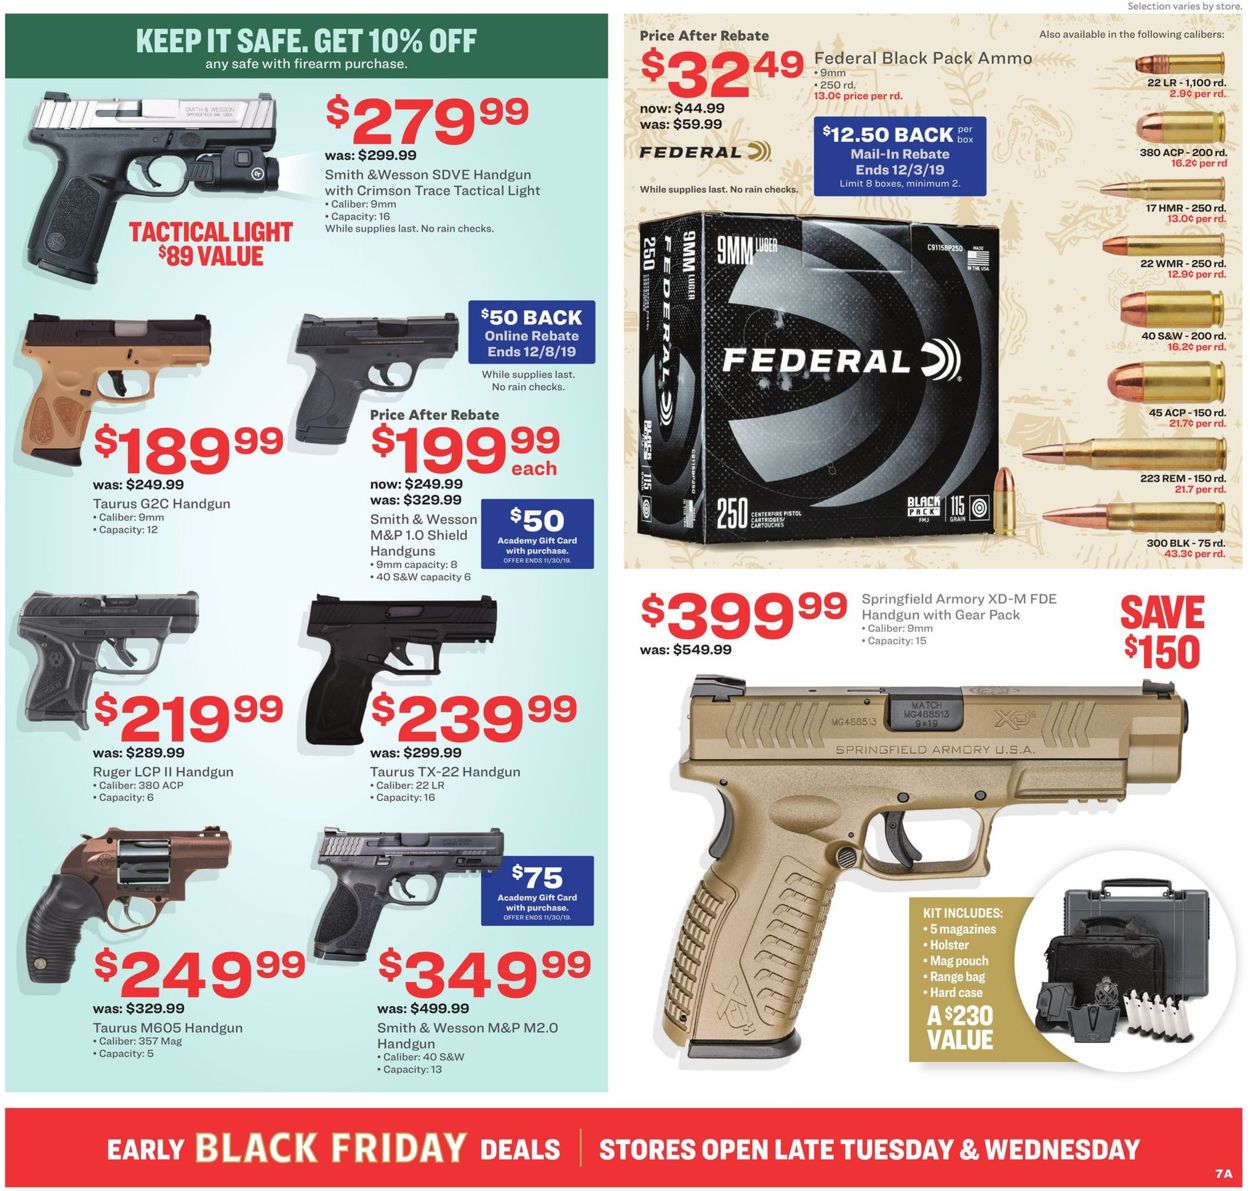 Academy Sports - Early Black Friday 2019 Current Weekly Ad 1124 - 12012019 8 - Frequent-adscom